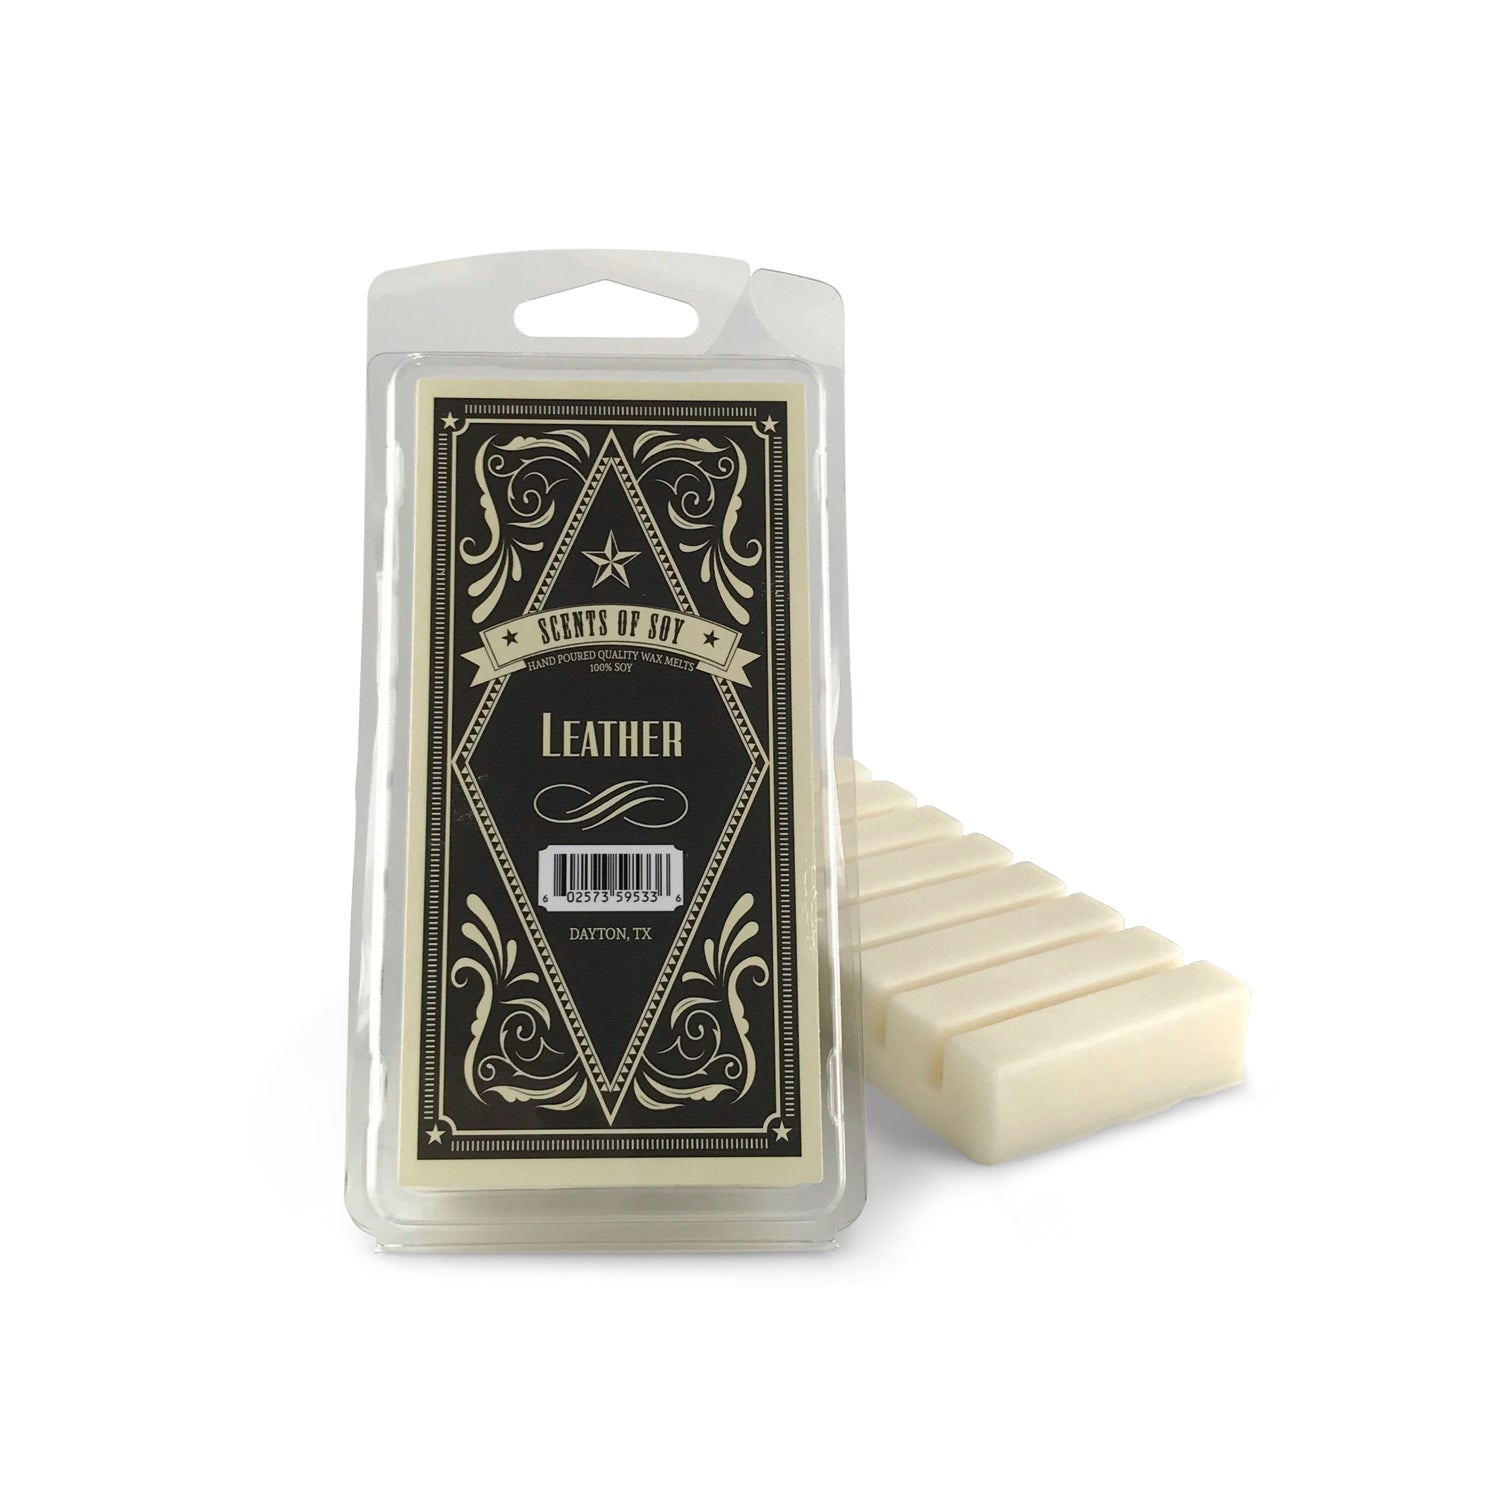 Leather Wax Melts by Candlecopia®, 2 Pack